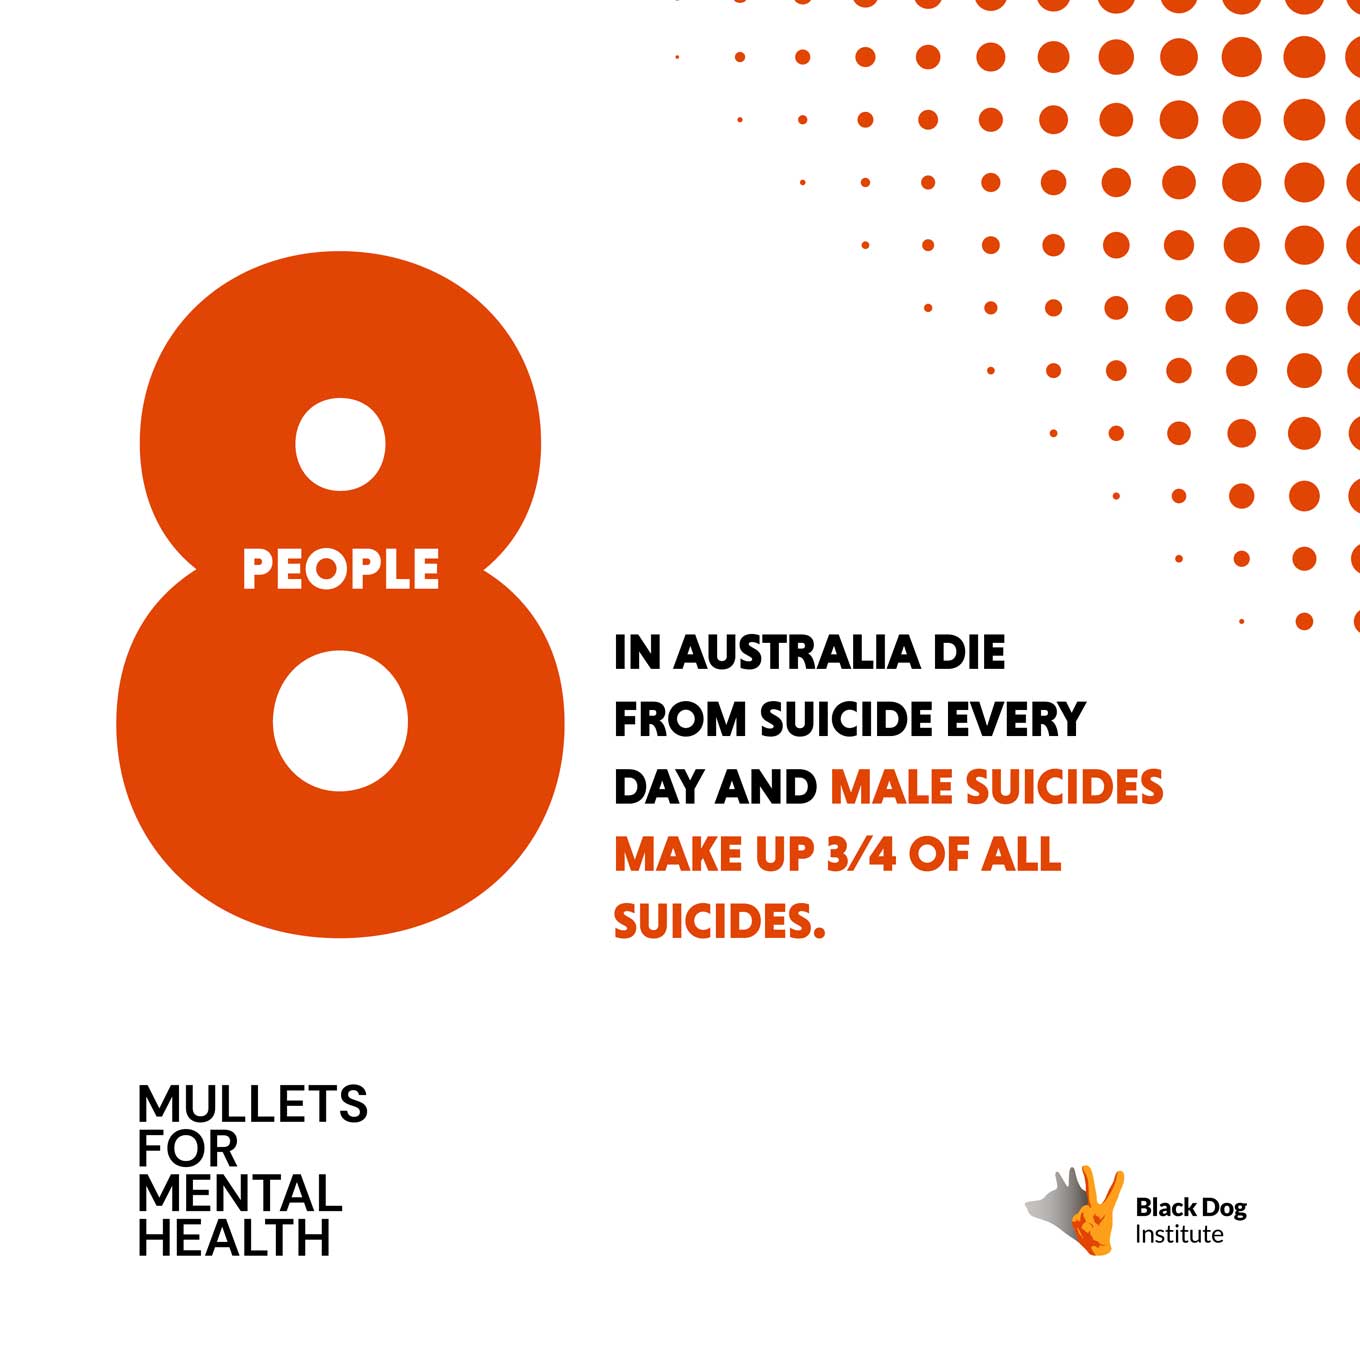 8 people in Australia die from suicide every day and male suicides make up 3/4 of all suicides.s